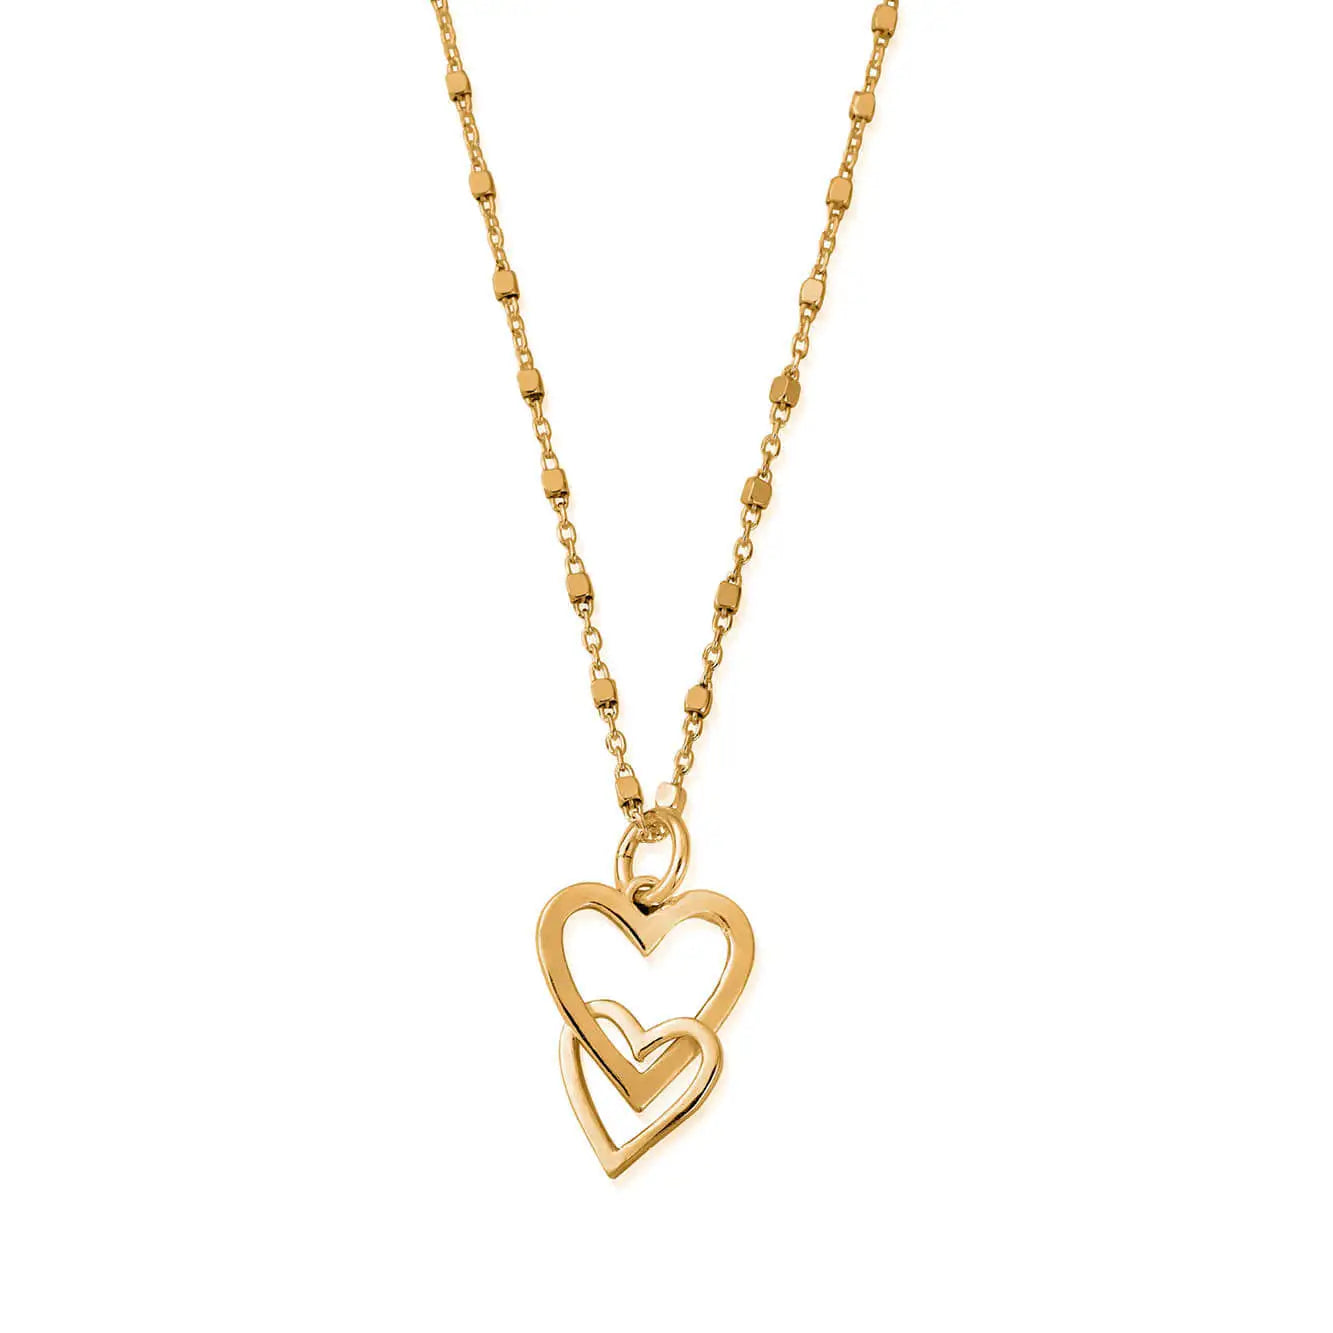 Photos - Pendant / Choker Necklace ChloBo Yellow Gold Plated Sterling Silver Interlocking Love Heart Necklace